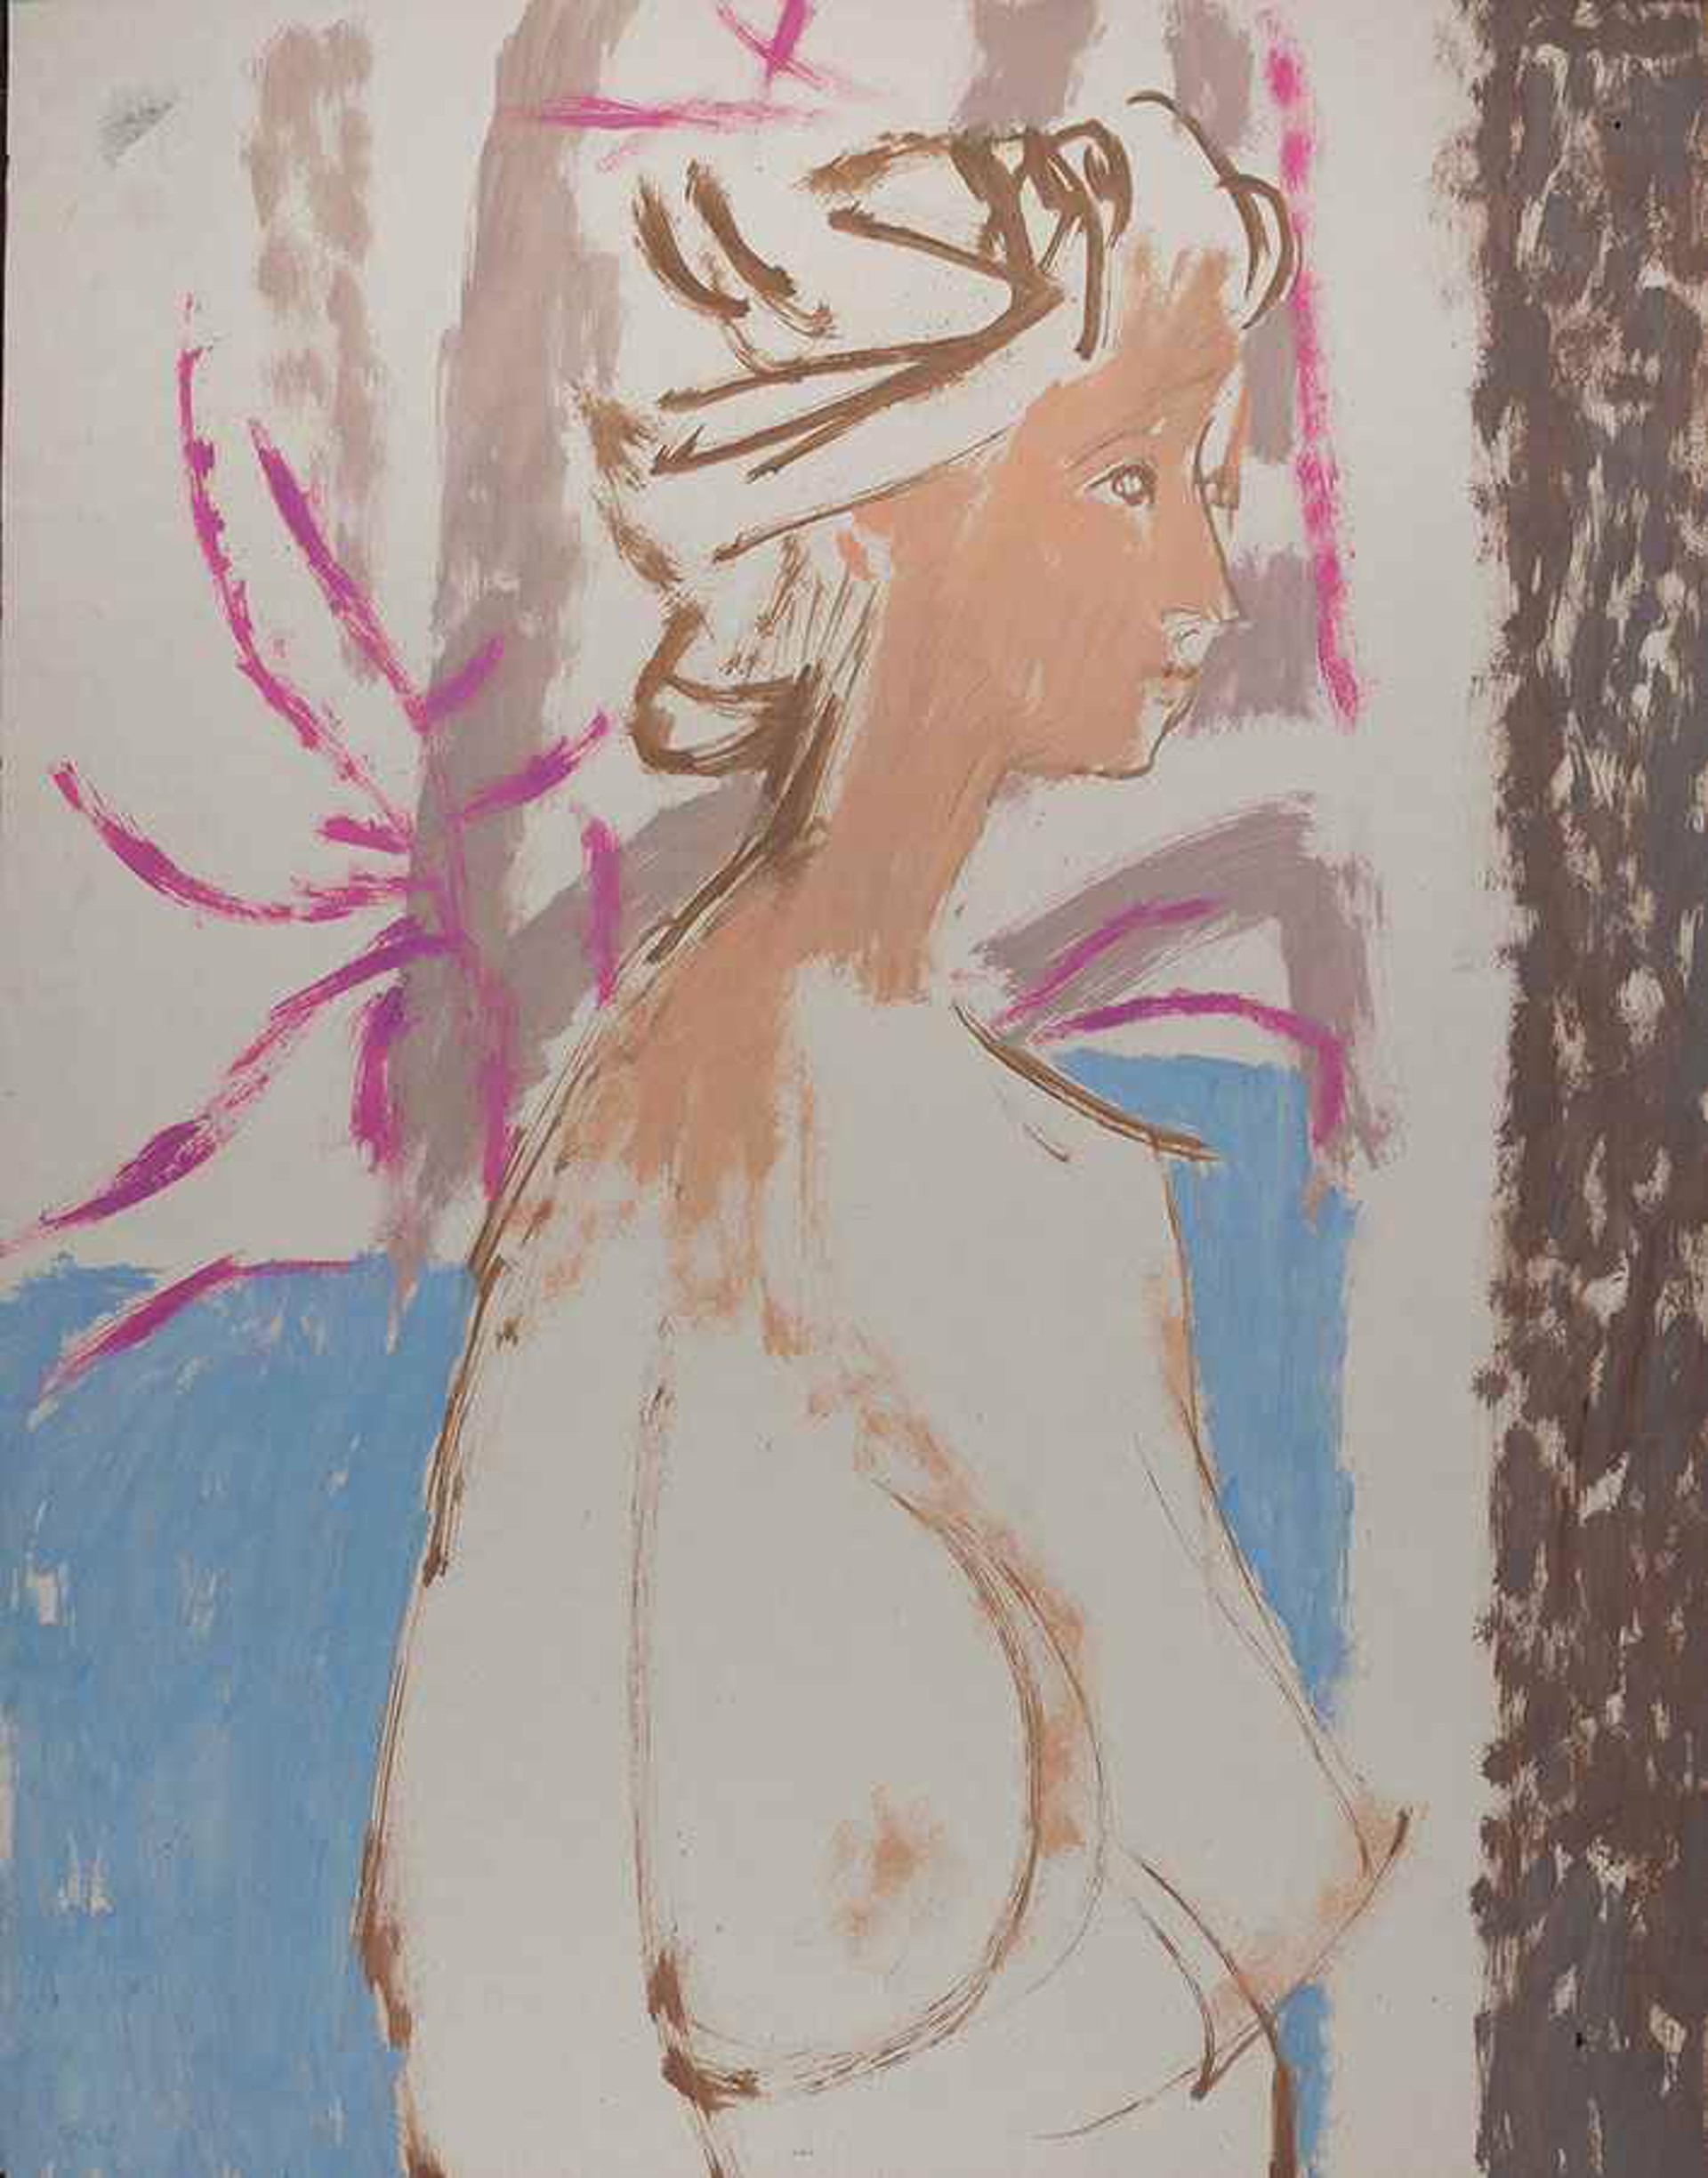 Untitled Figure (1950's) by Andrew Bucci